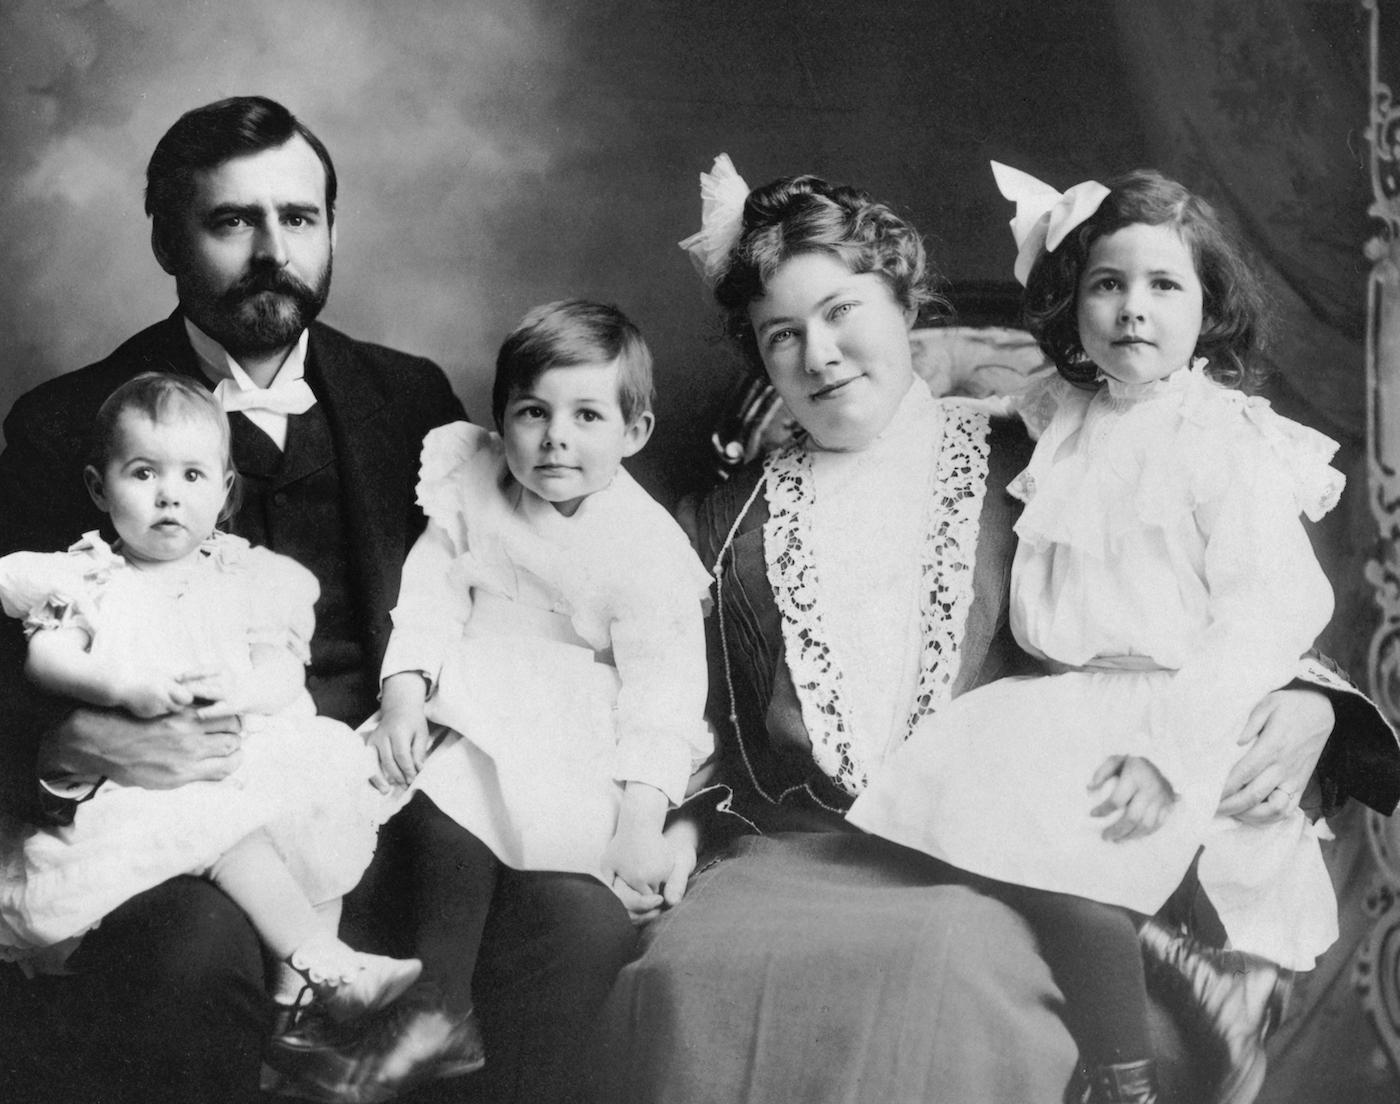 Hemingway family portrait. From left to right: Ursula, Clarence, Ernest, Grace, and Marcelline Hemingway. October 1903. Image: Ernest Hemingway Collection. John F. Kennedy Presidential Library and Museum, Boston